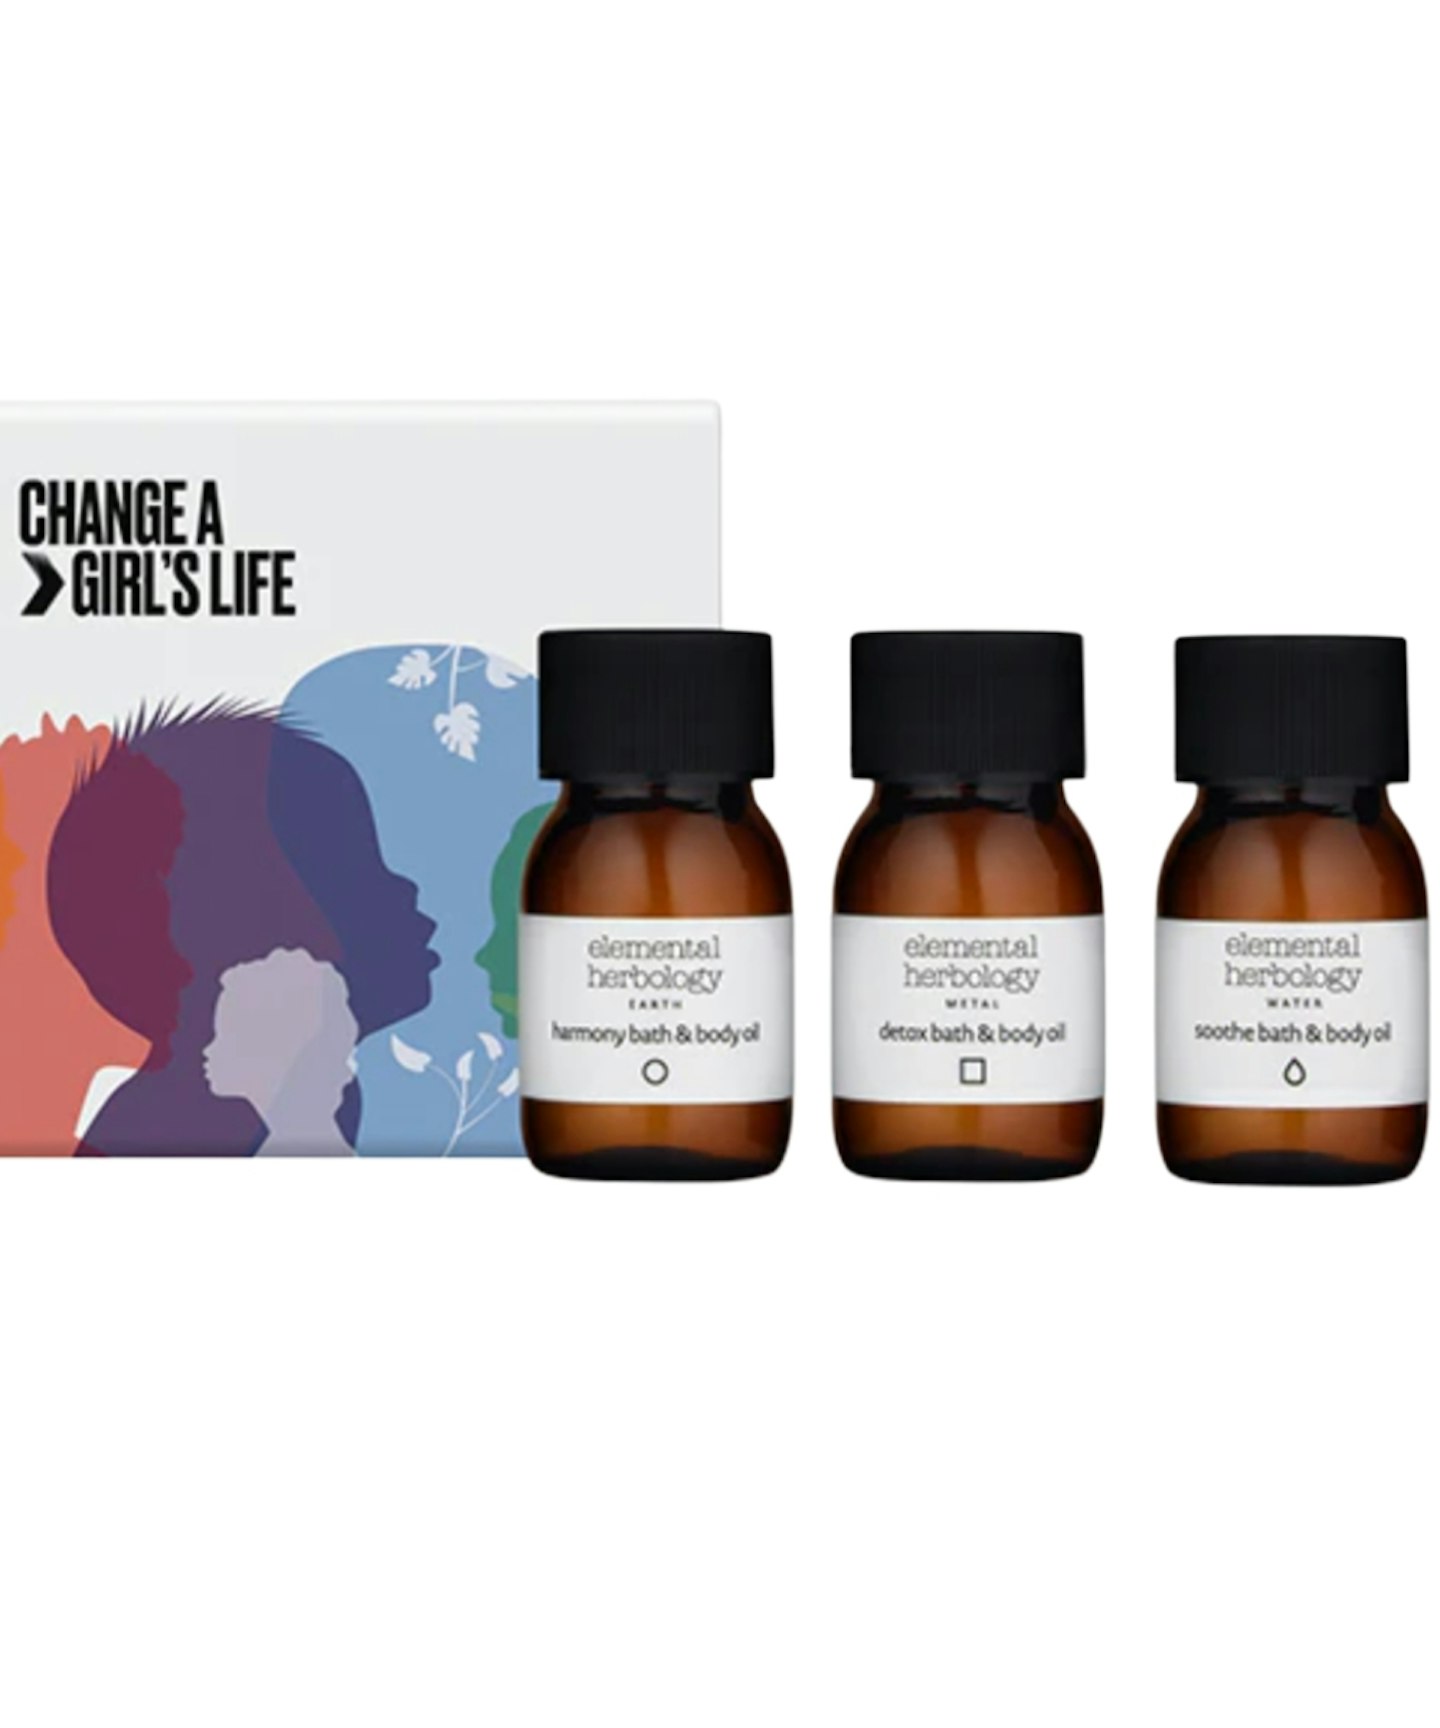 International Women's Day gifts Elemental Herbology, Elemental Experience Body Oil Collection (Donation to: #ChangeAGirlsLife Campaign)